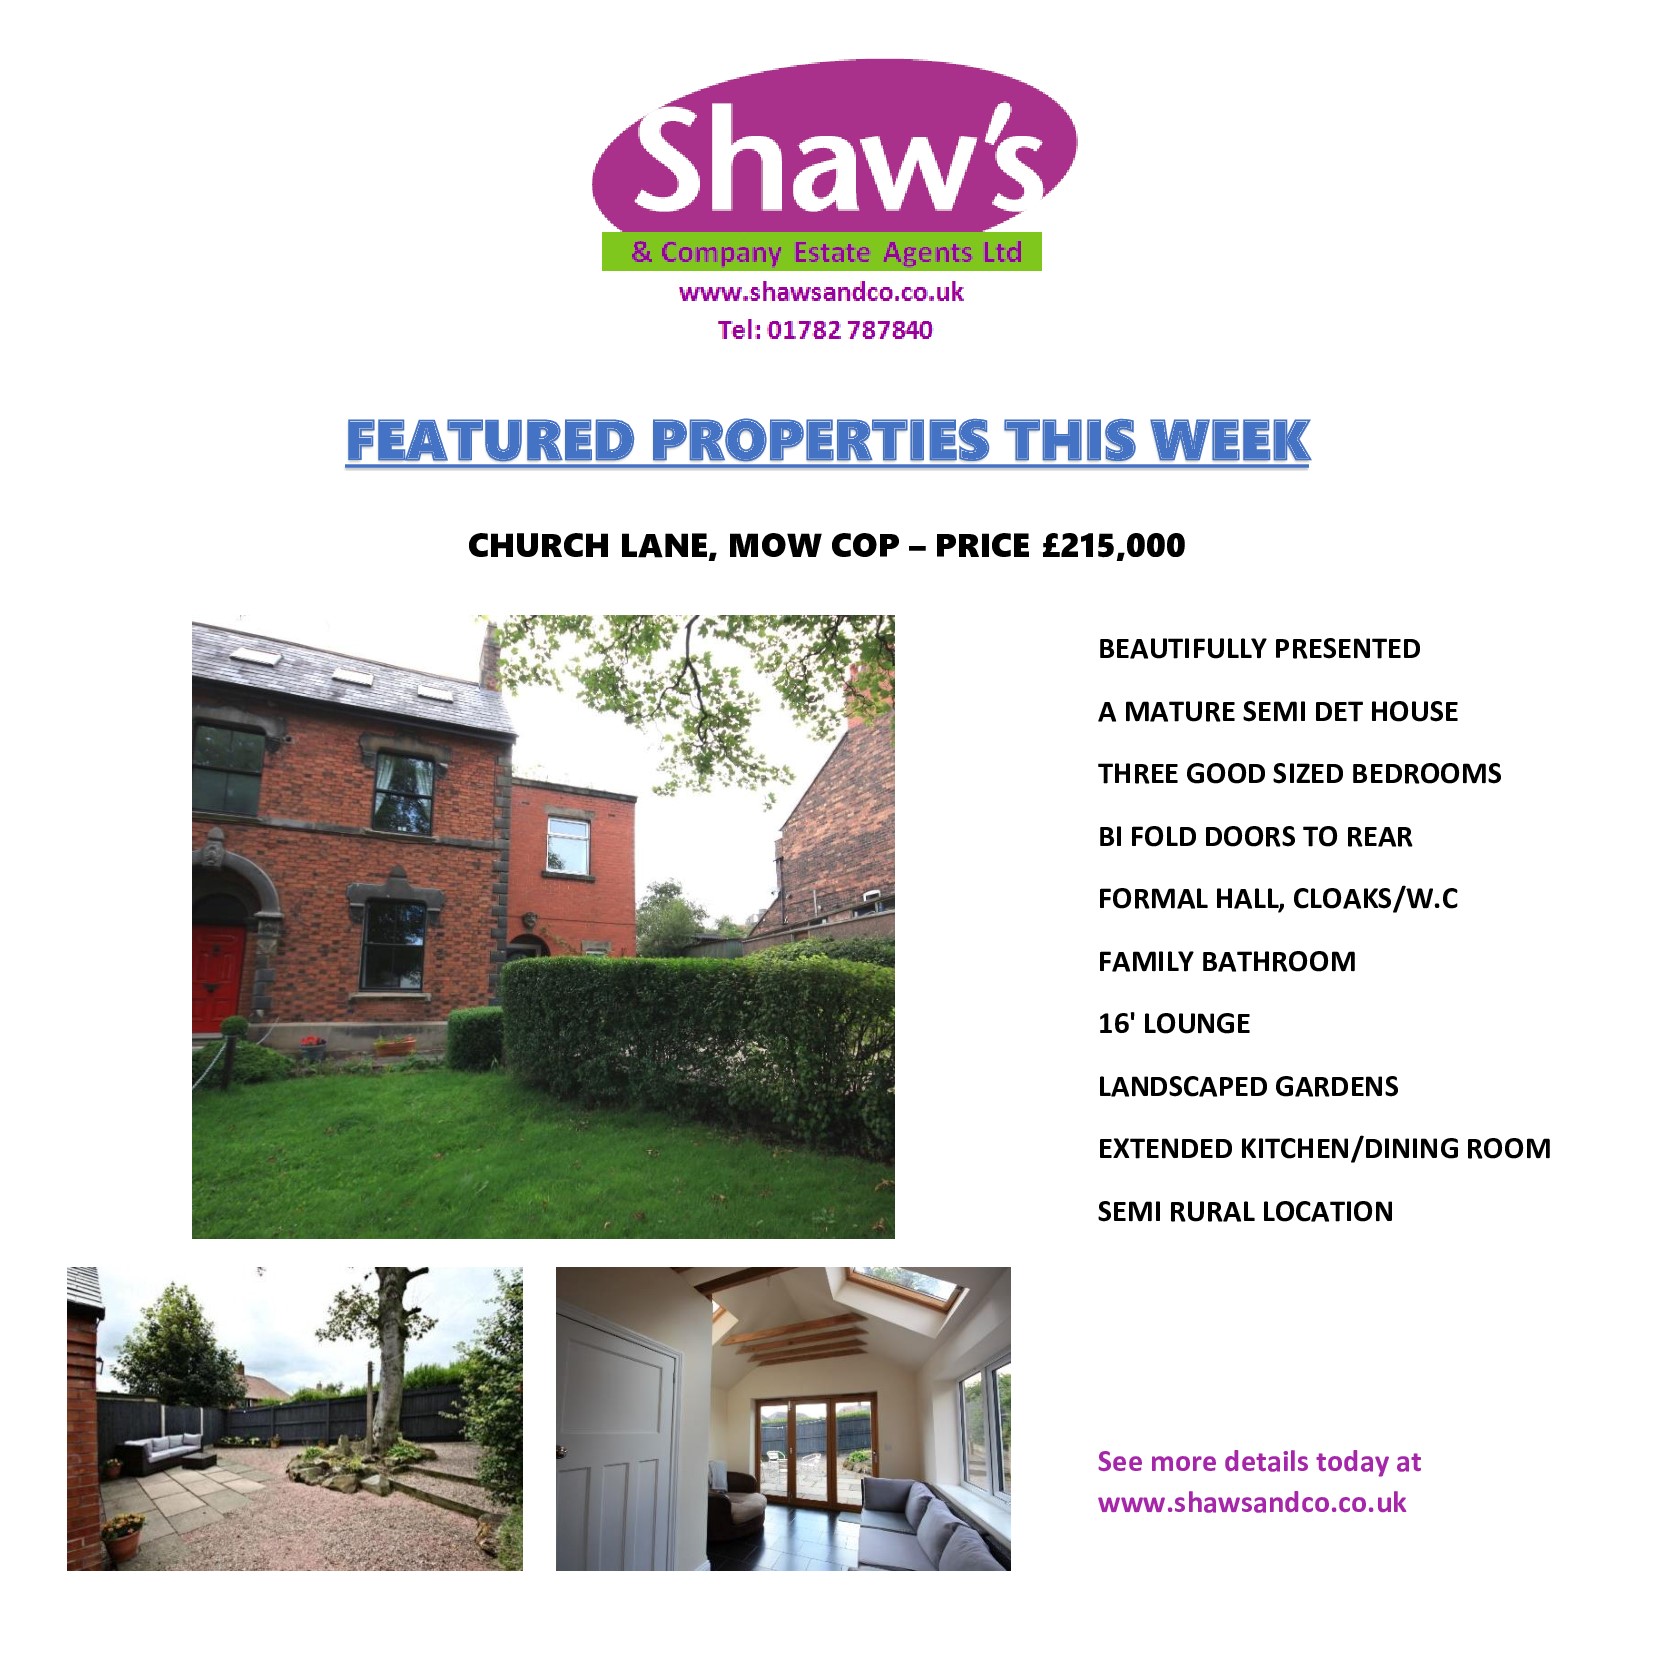 NEW ON THE MARKET THIS WEEK!